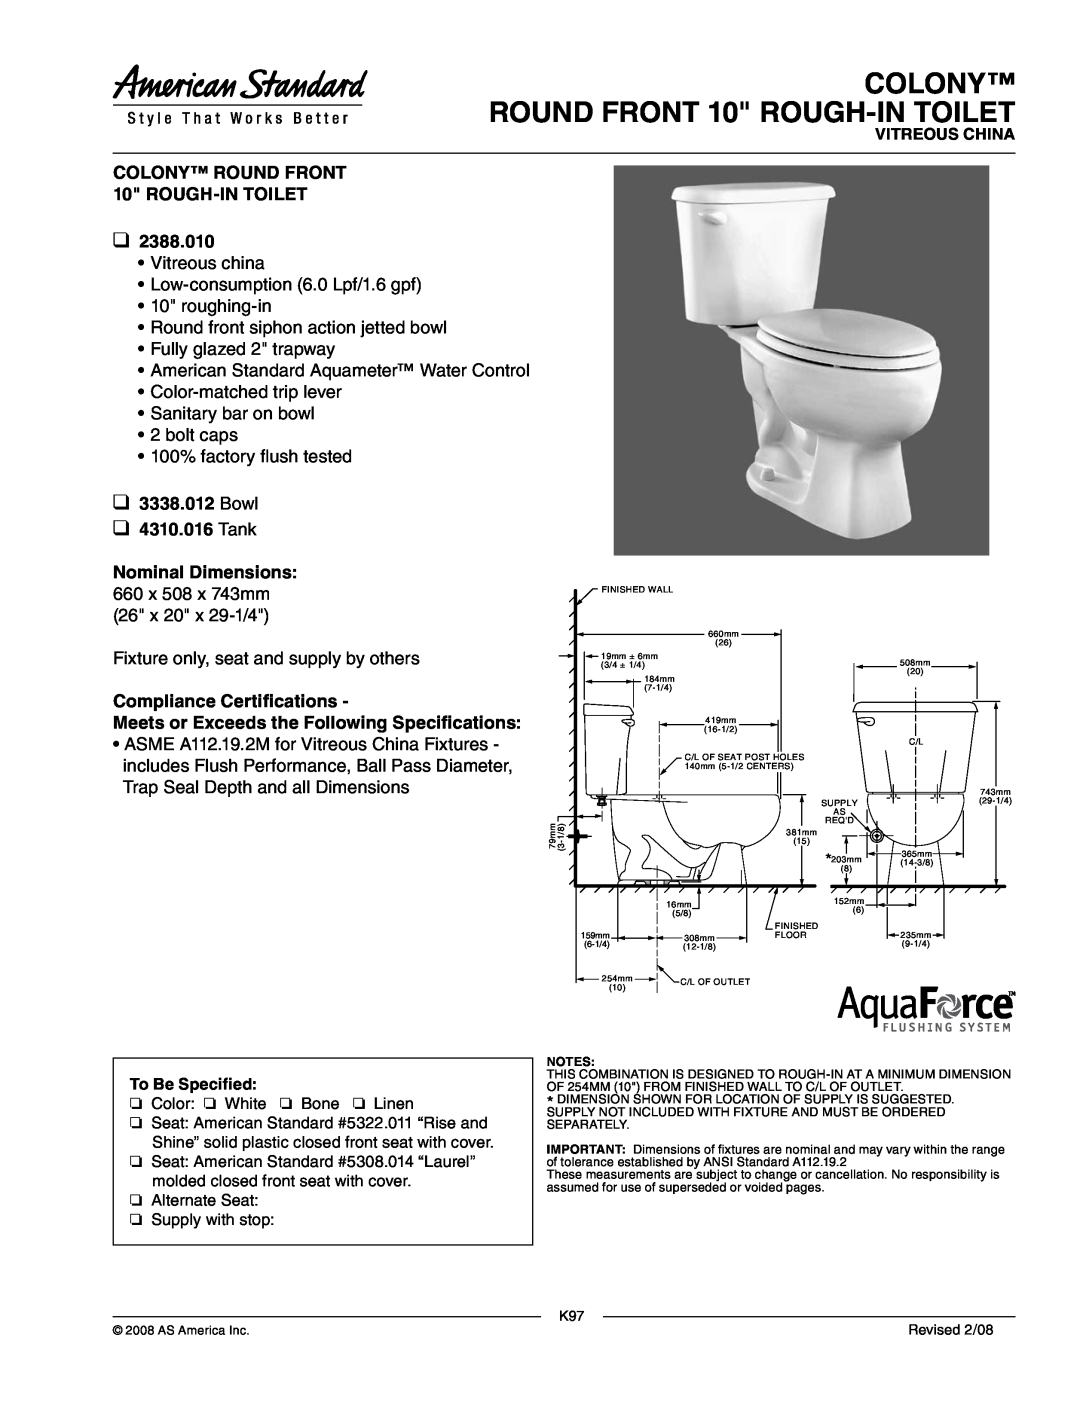 American Standard 2388.010 dimensions COLONY ROUND FRONT 10 ROUGH-INTOILET, Bowl 4310.016 Tank, Nominal Dimensions 